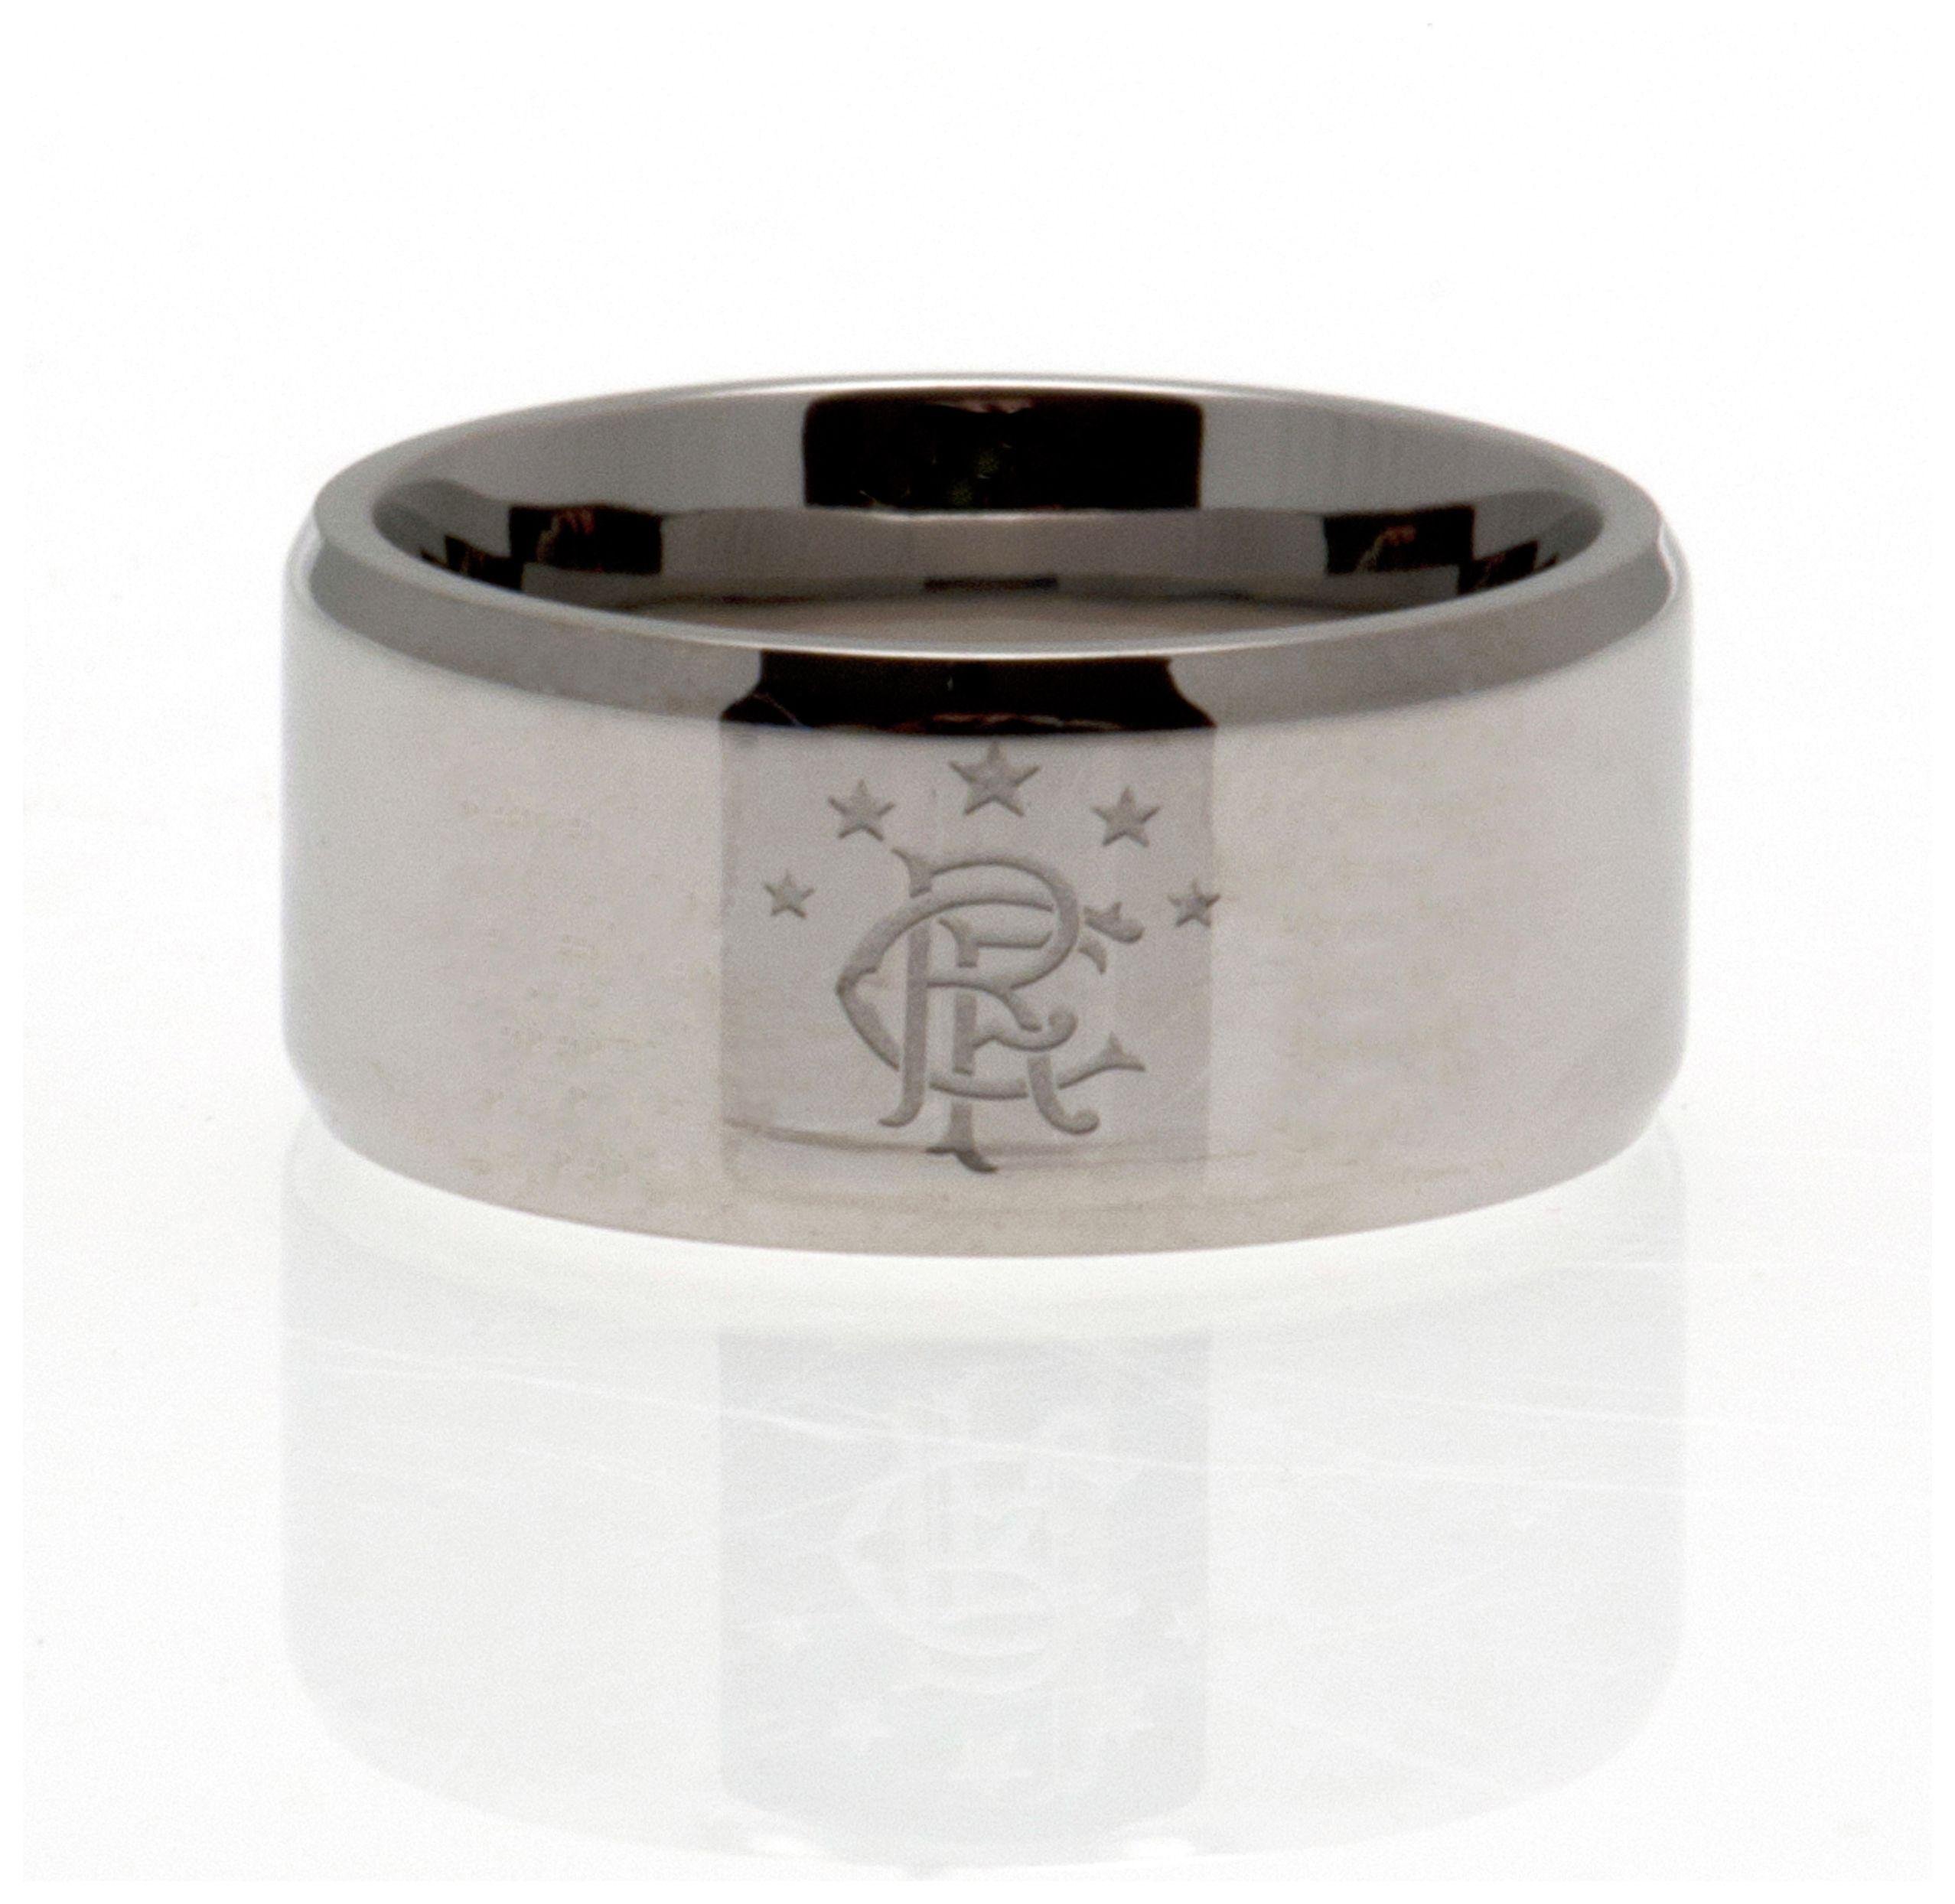 Stainless Steel Rangers Ring - Size U